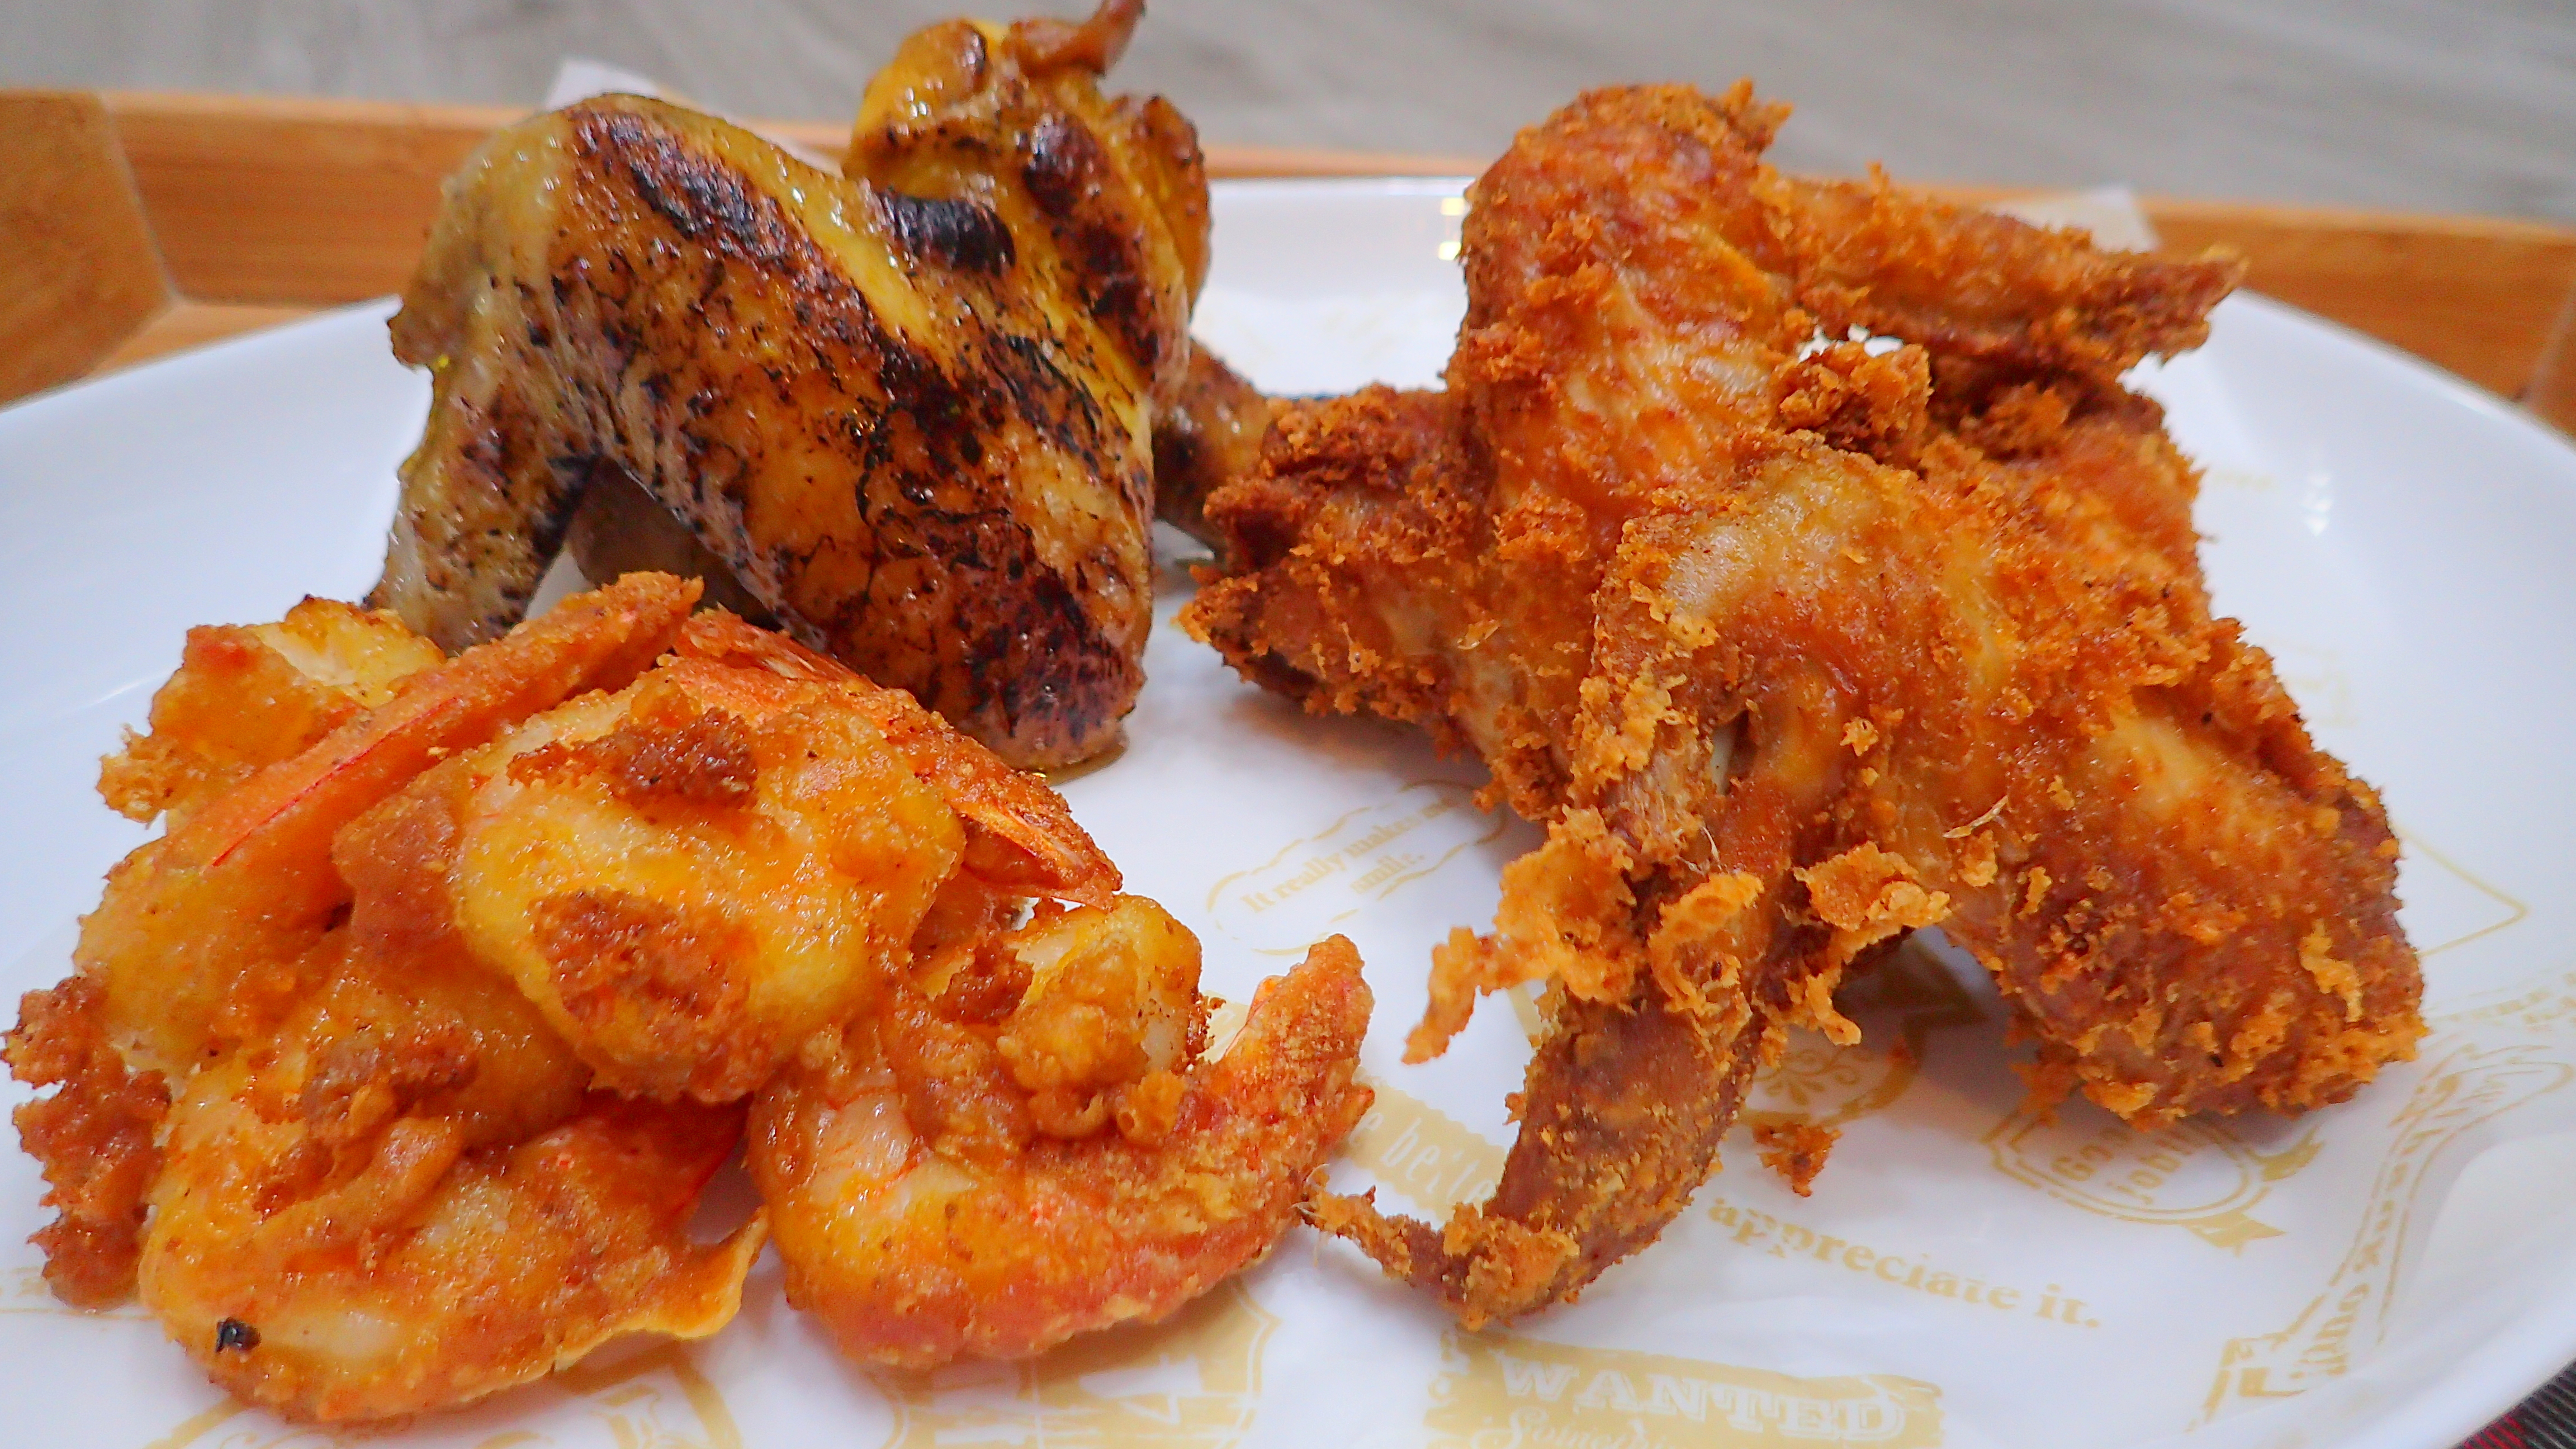 Fried and Roasted chicken wings